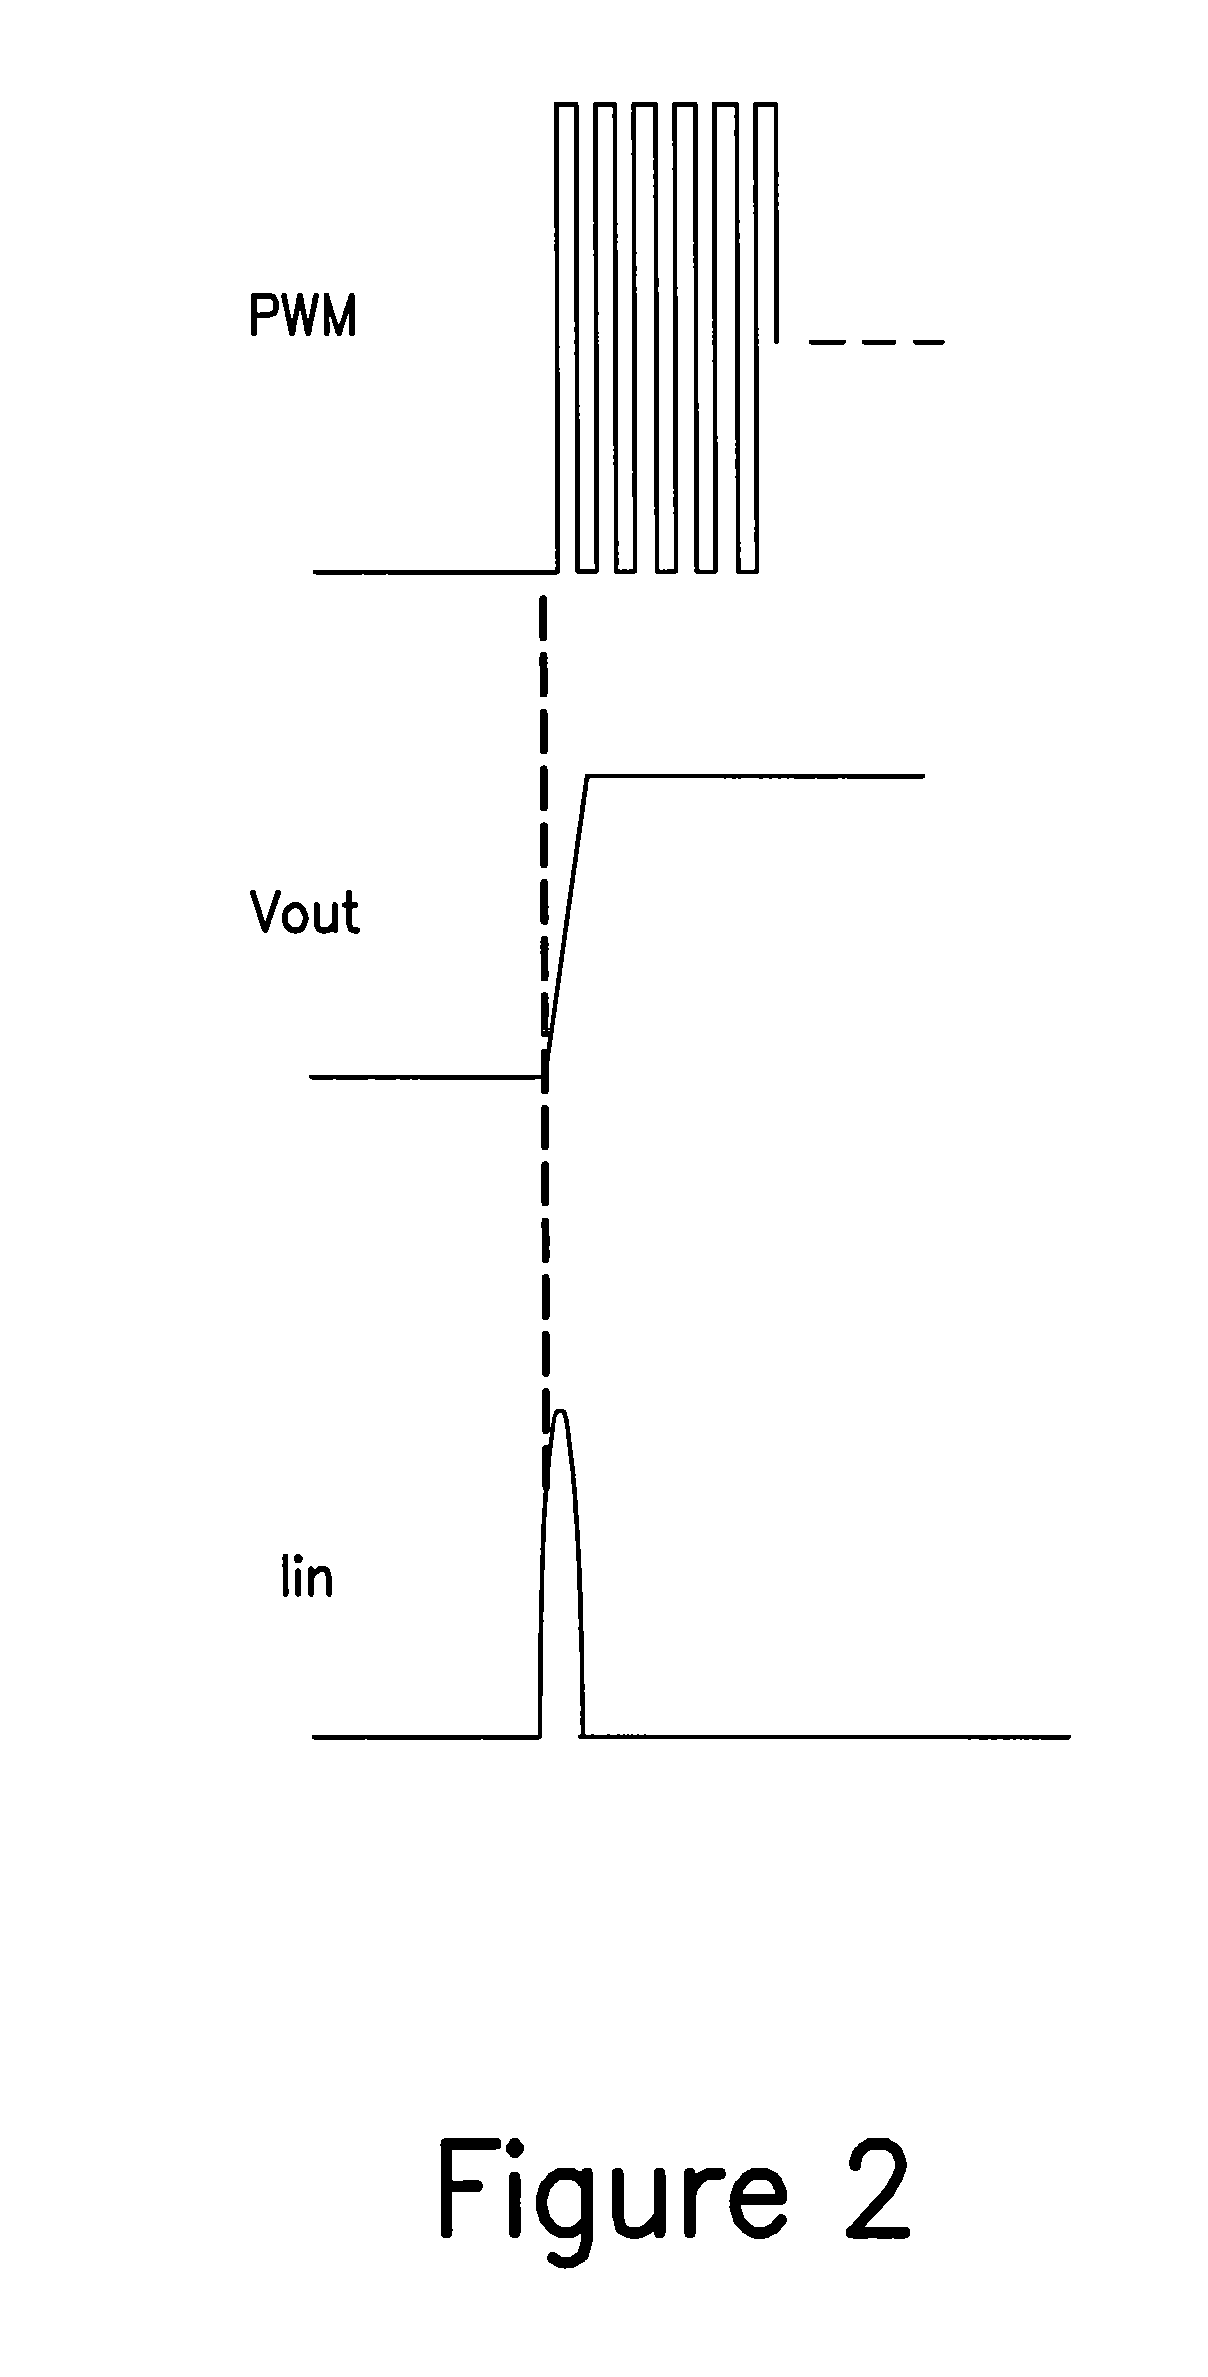 Method to reduce inrush voltage and current in a switching power converter